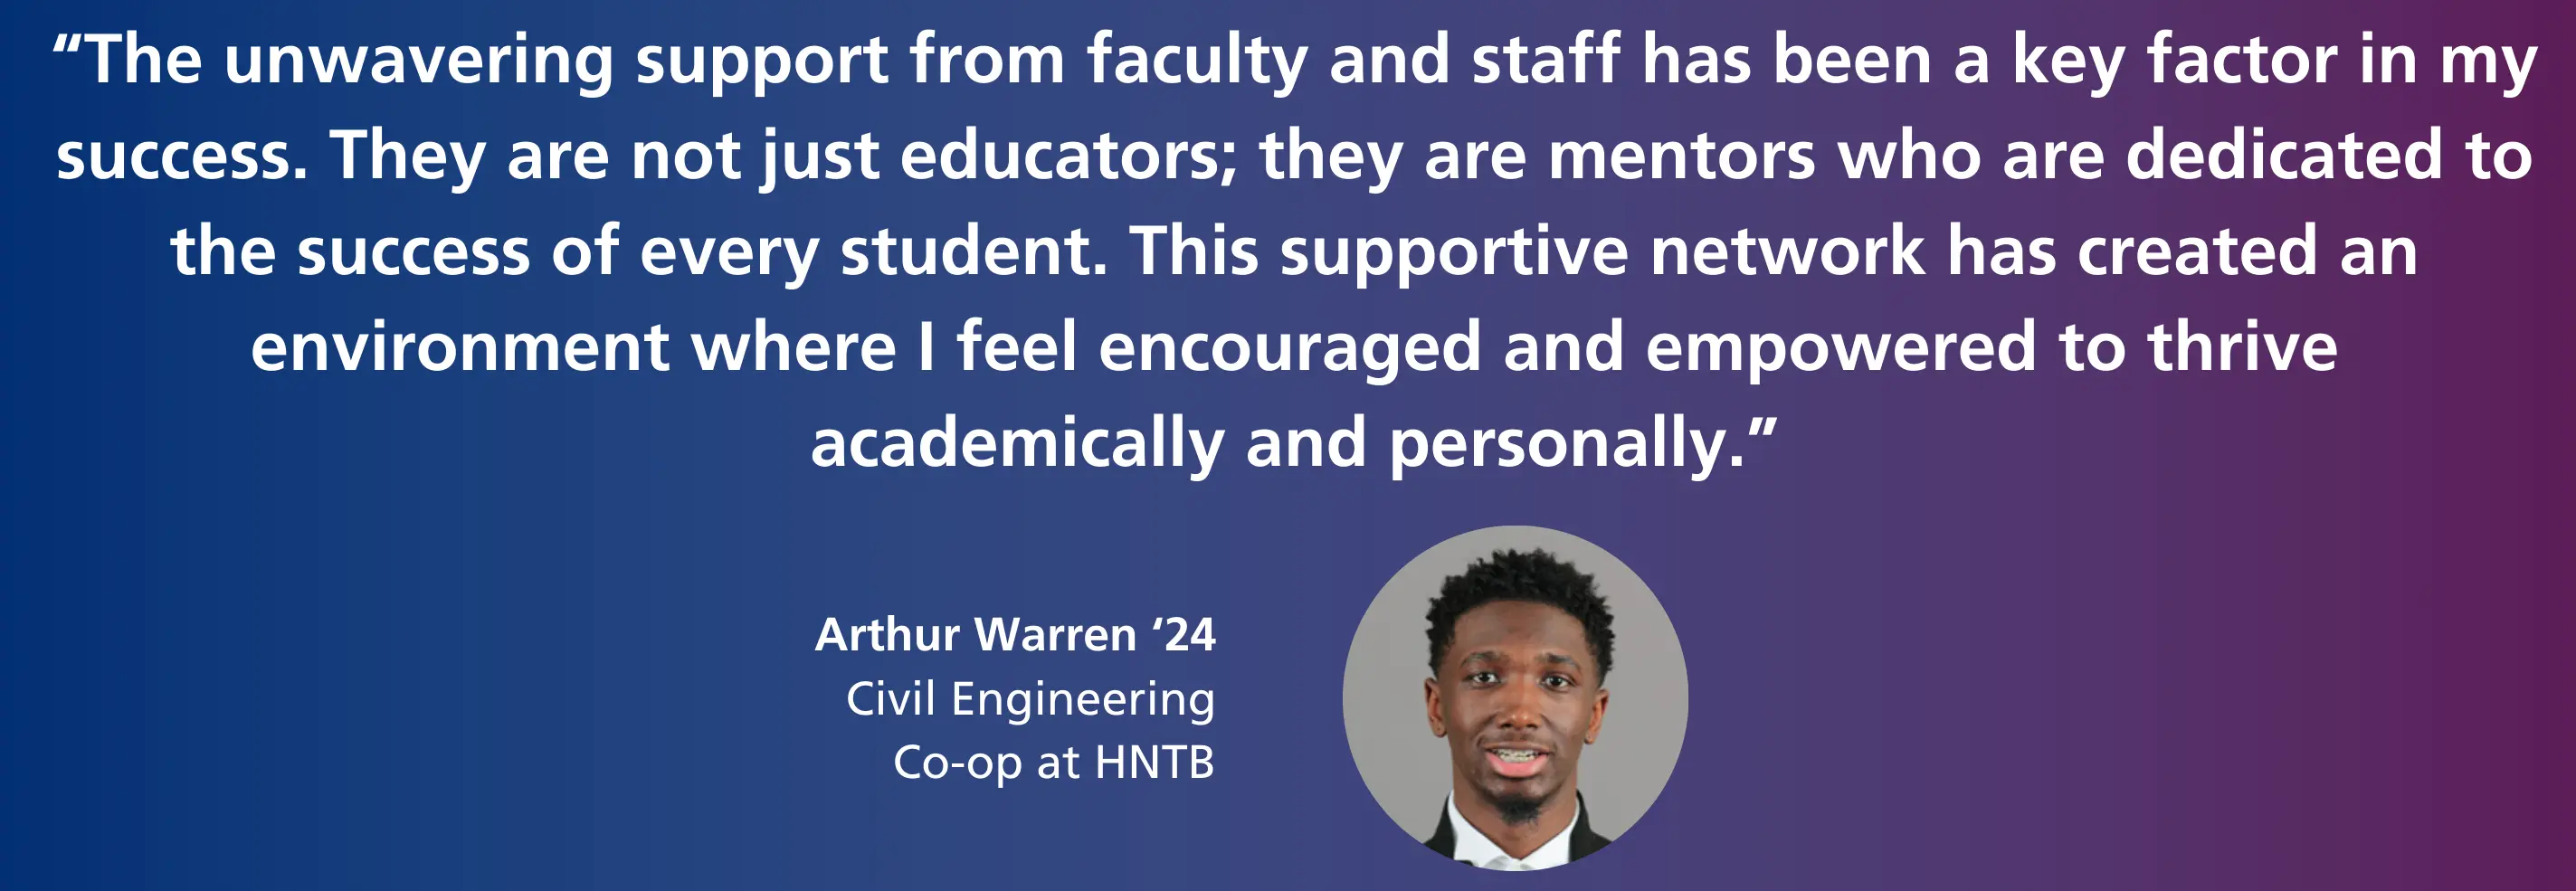 "The unwavering support from faculty and staff has been a key factor in my success. They are not just educators; they are mentors who are dedicated to the success of every student. This supportive network has created an environment where I feel encouraged and empowered to thrive academically and personally." - Arthur Warren '24